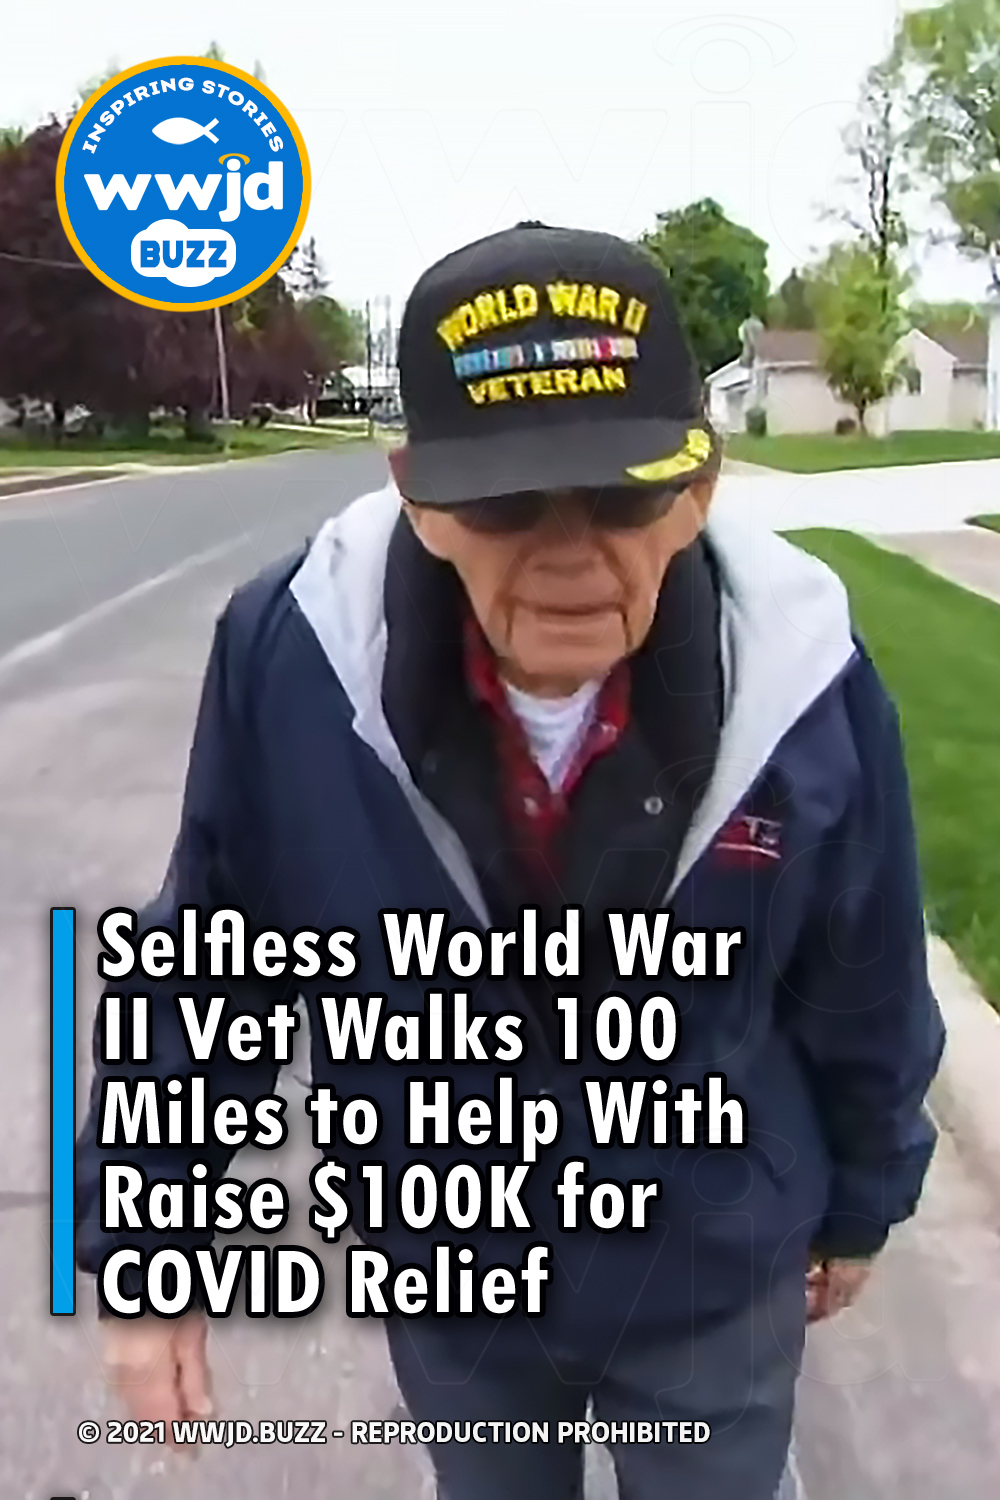 Selfless World War II Vet Walks 100 Miles to Help With Raise $100K for COVID Relief